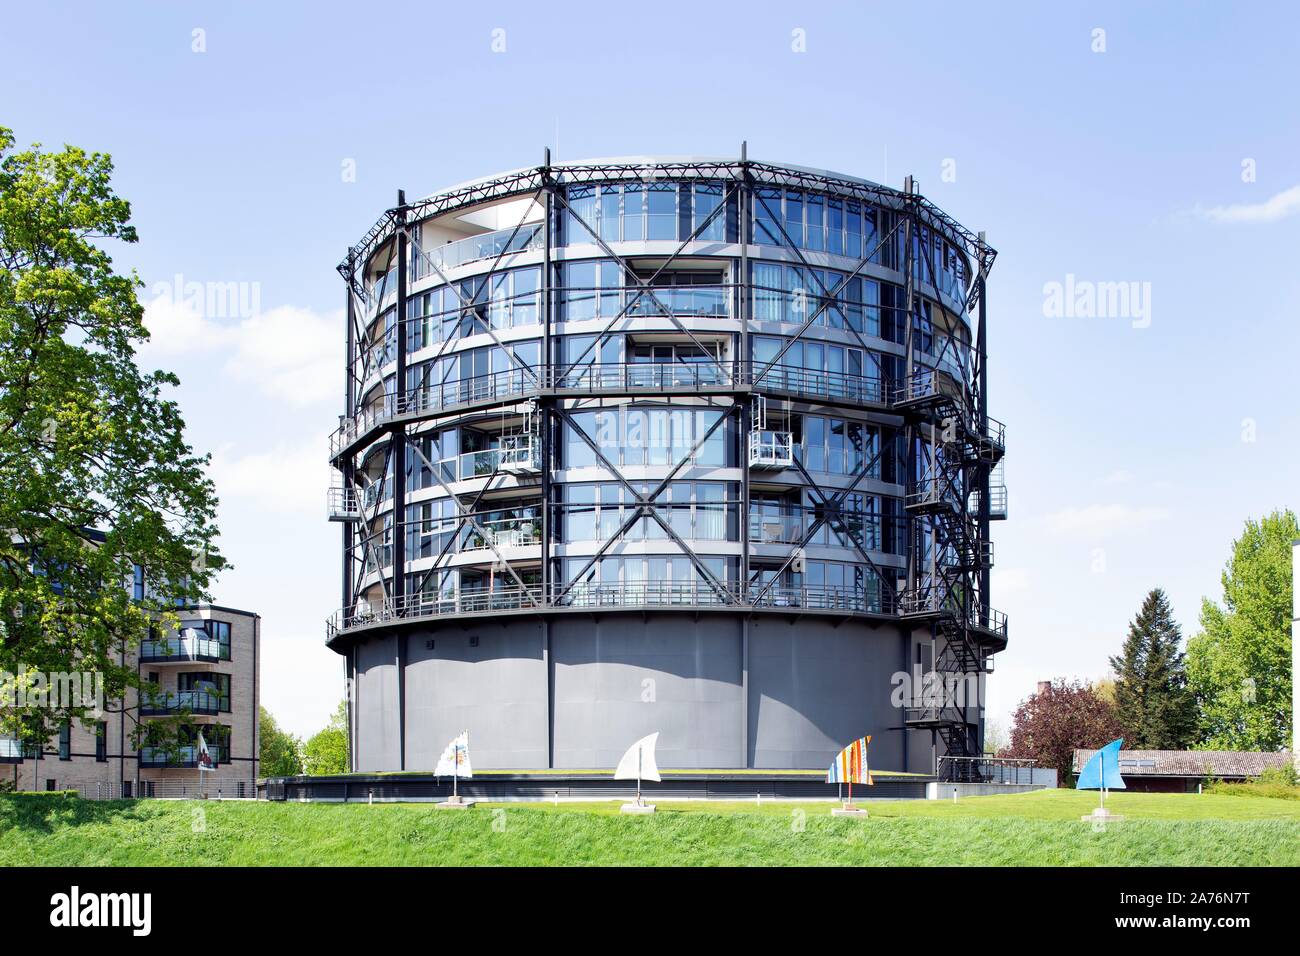 Gas container at Stade city port, industrial monument, today residential building, Stade, Lower Saxony, Germany Stock Photo